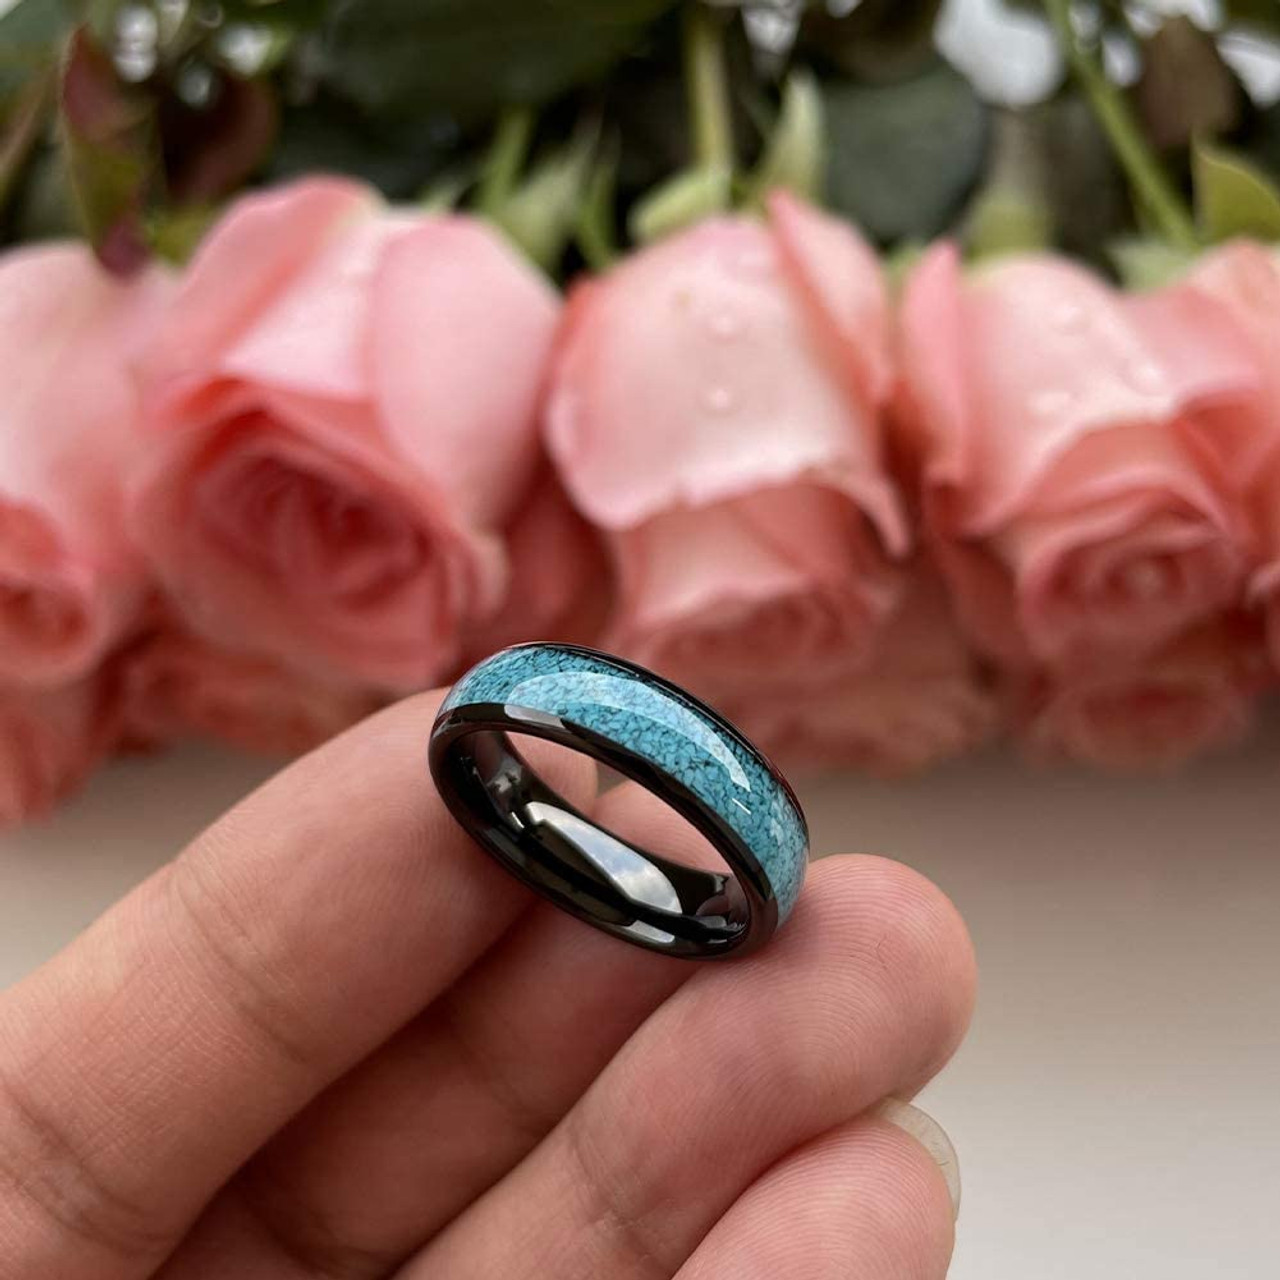 (6mm) Unisex or Women's Blue Turquoise Inlay Tungsten Carbide Wedding Ring Band. Black Domed Style Tungsten Carbide Ring Comfort Fit.